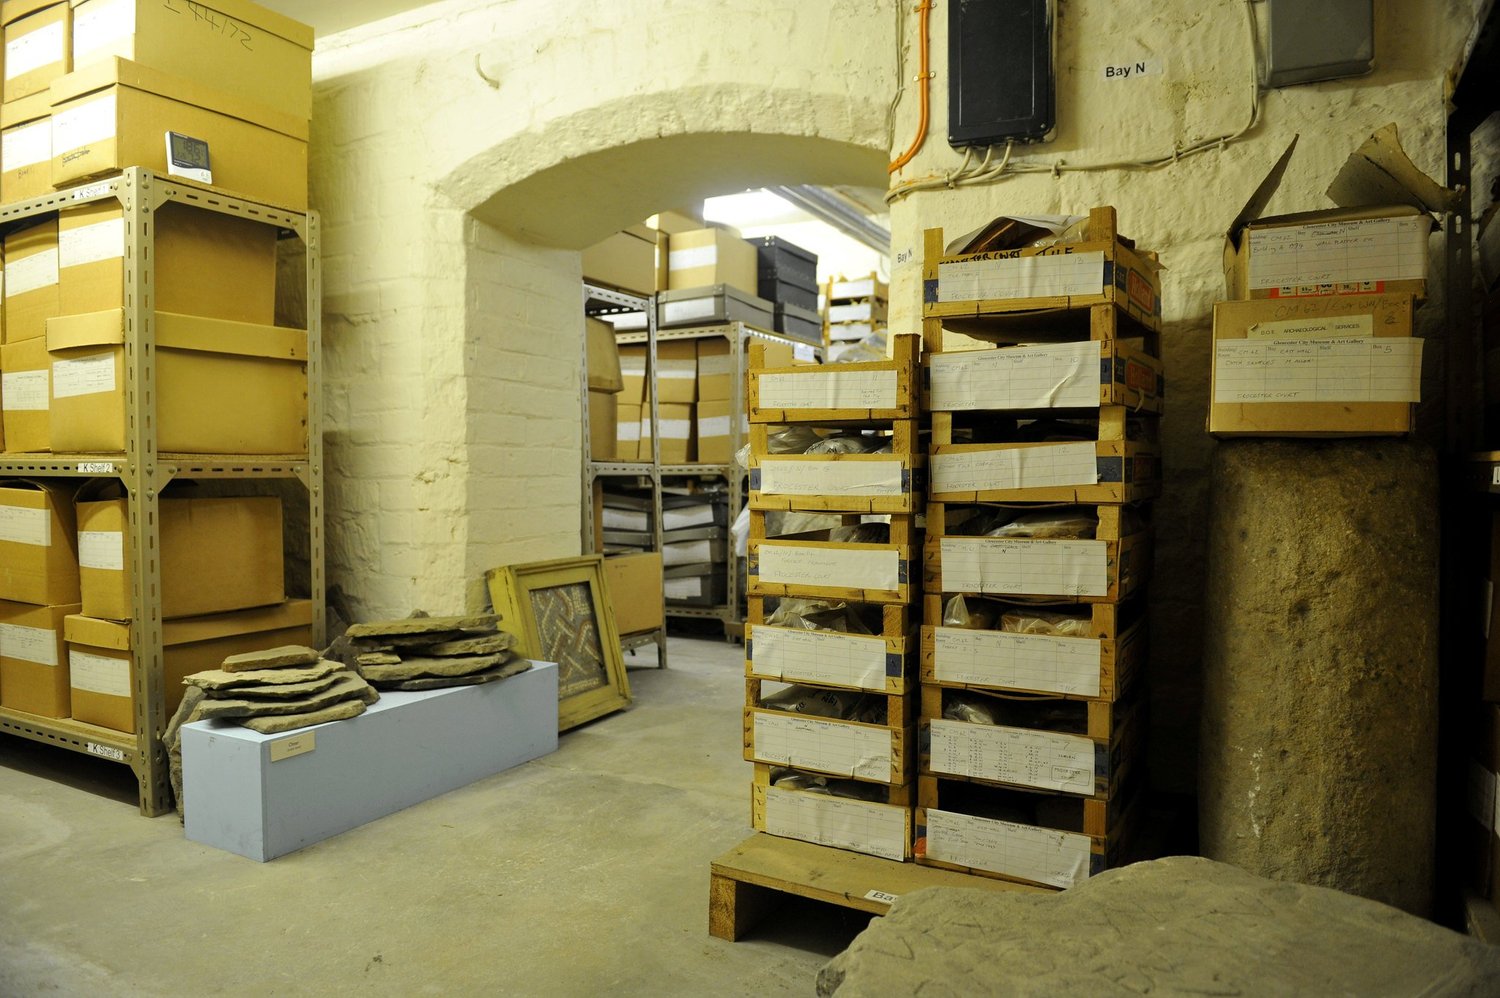 Store Room at the Museum of Gloucester